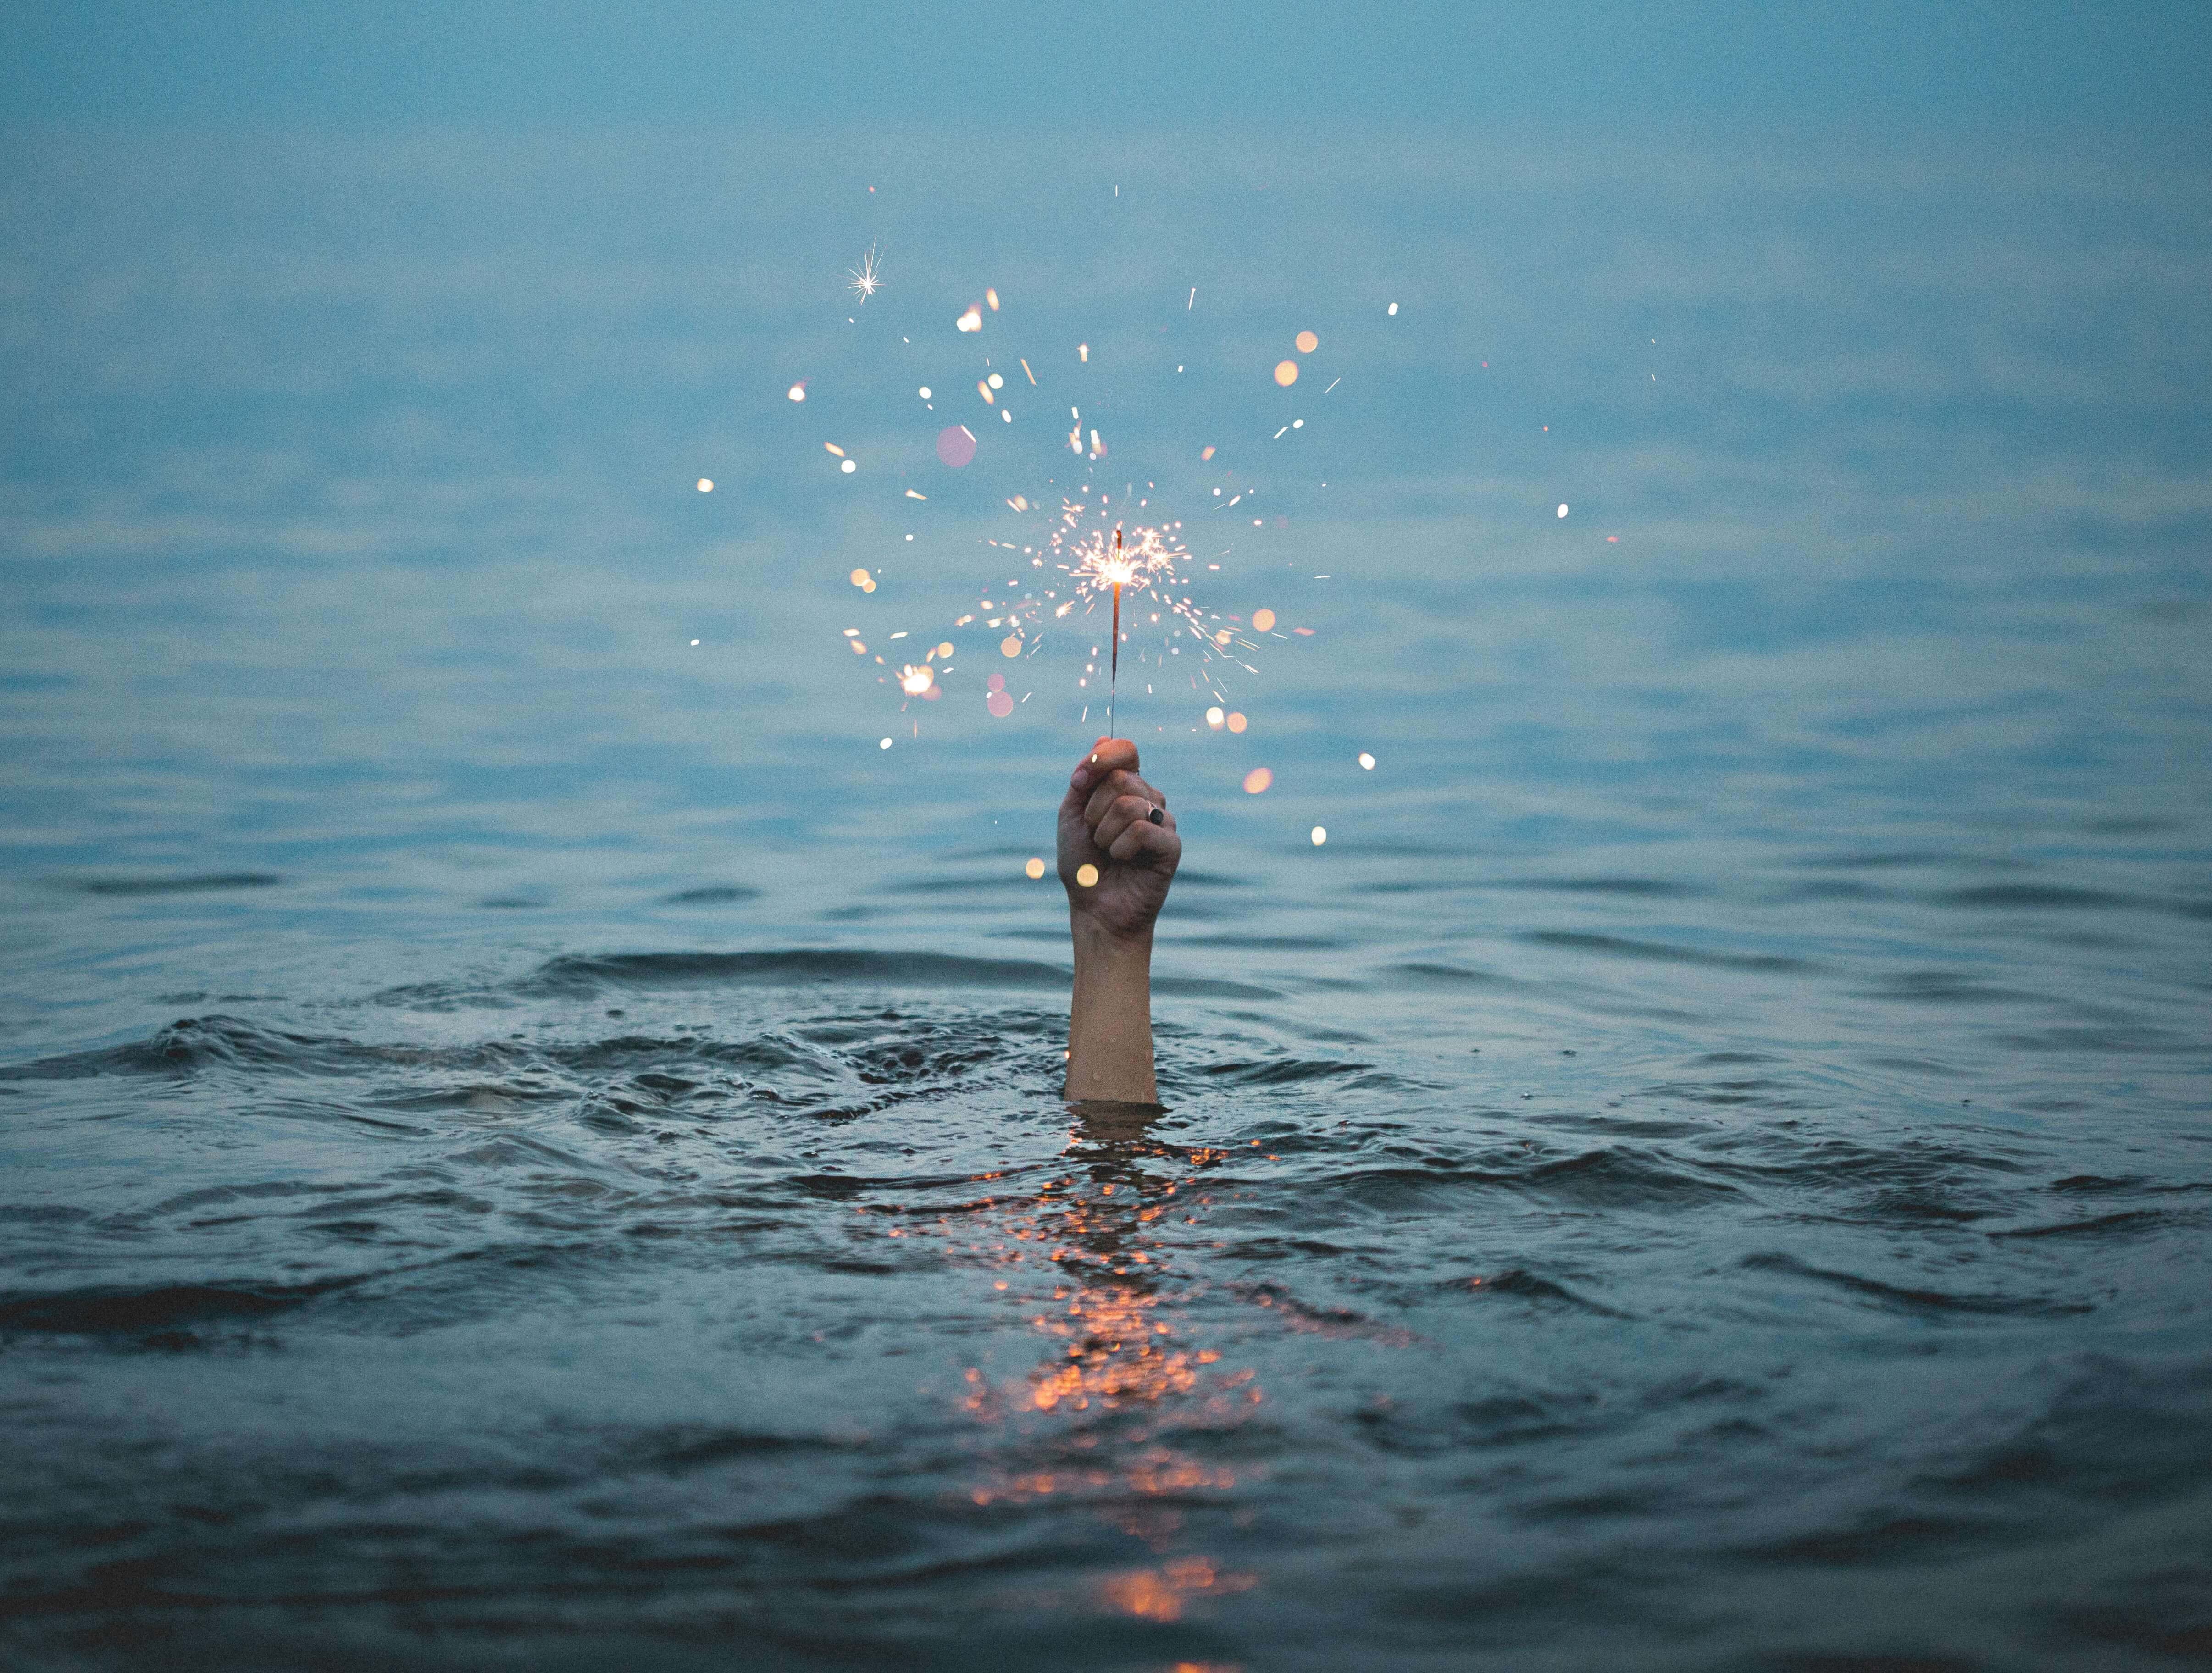 A hand holding a sparkler reaching out of the water